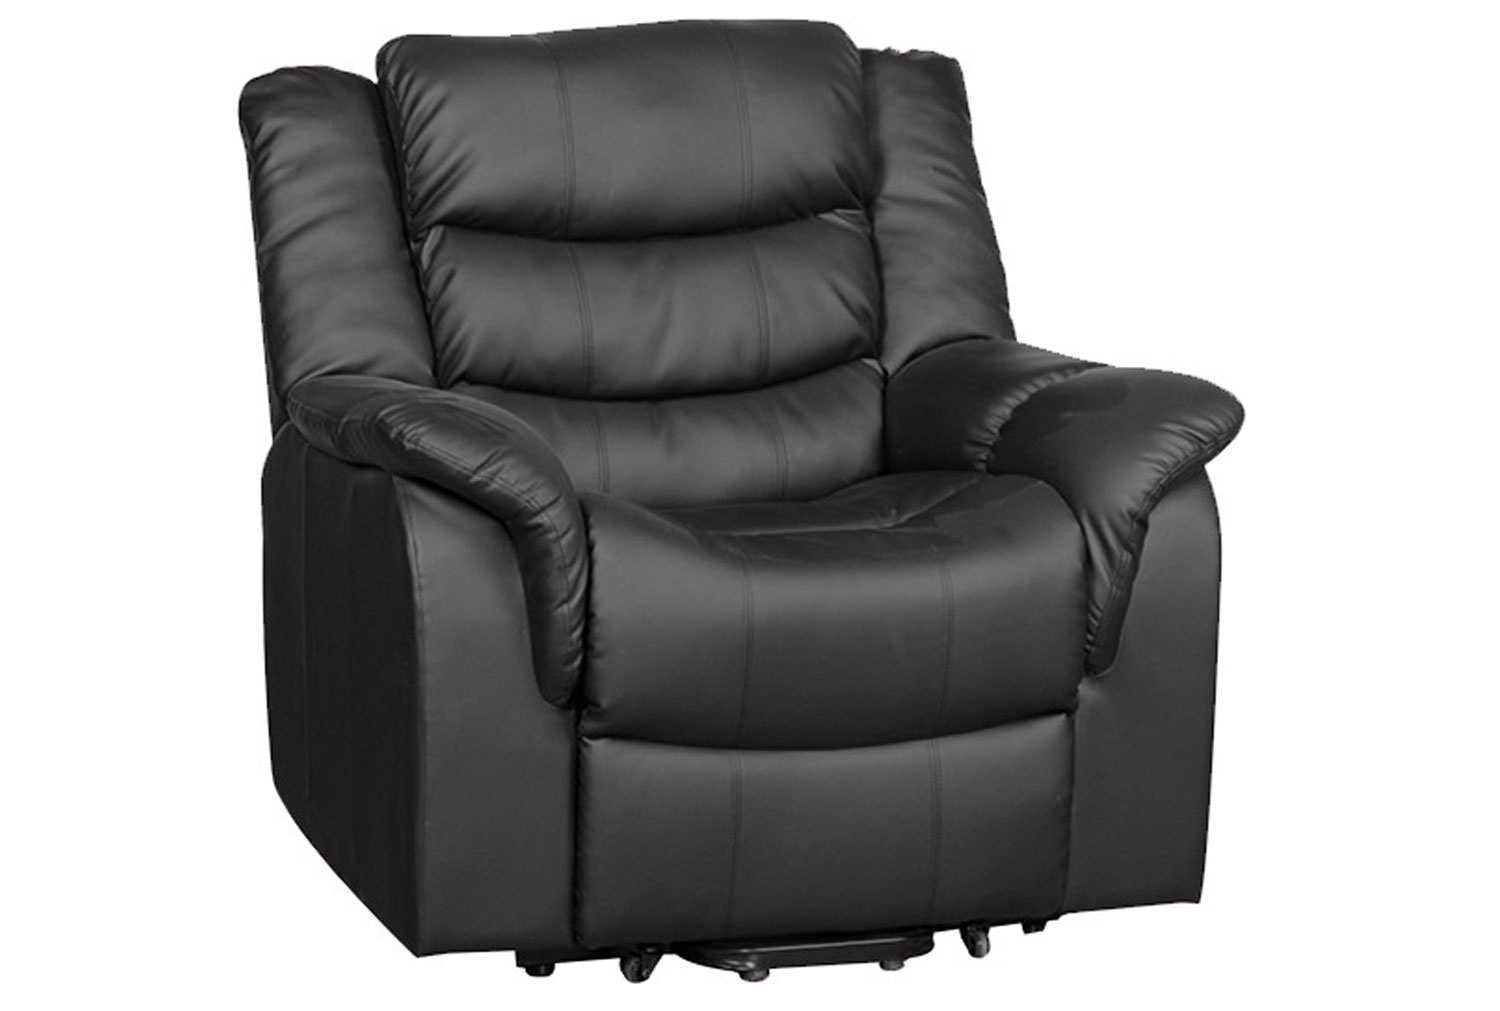 Hunter Leather Recliner Office ArmOffice Chair (Black), Manual Recliner